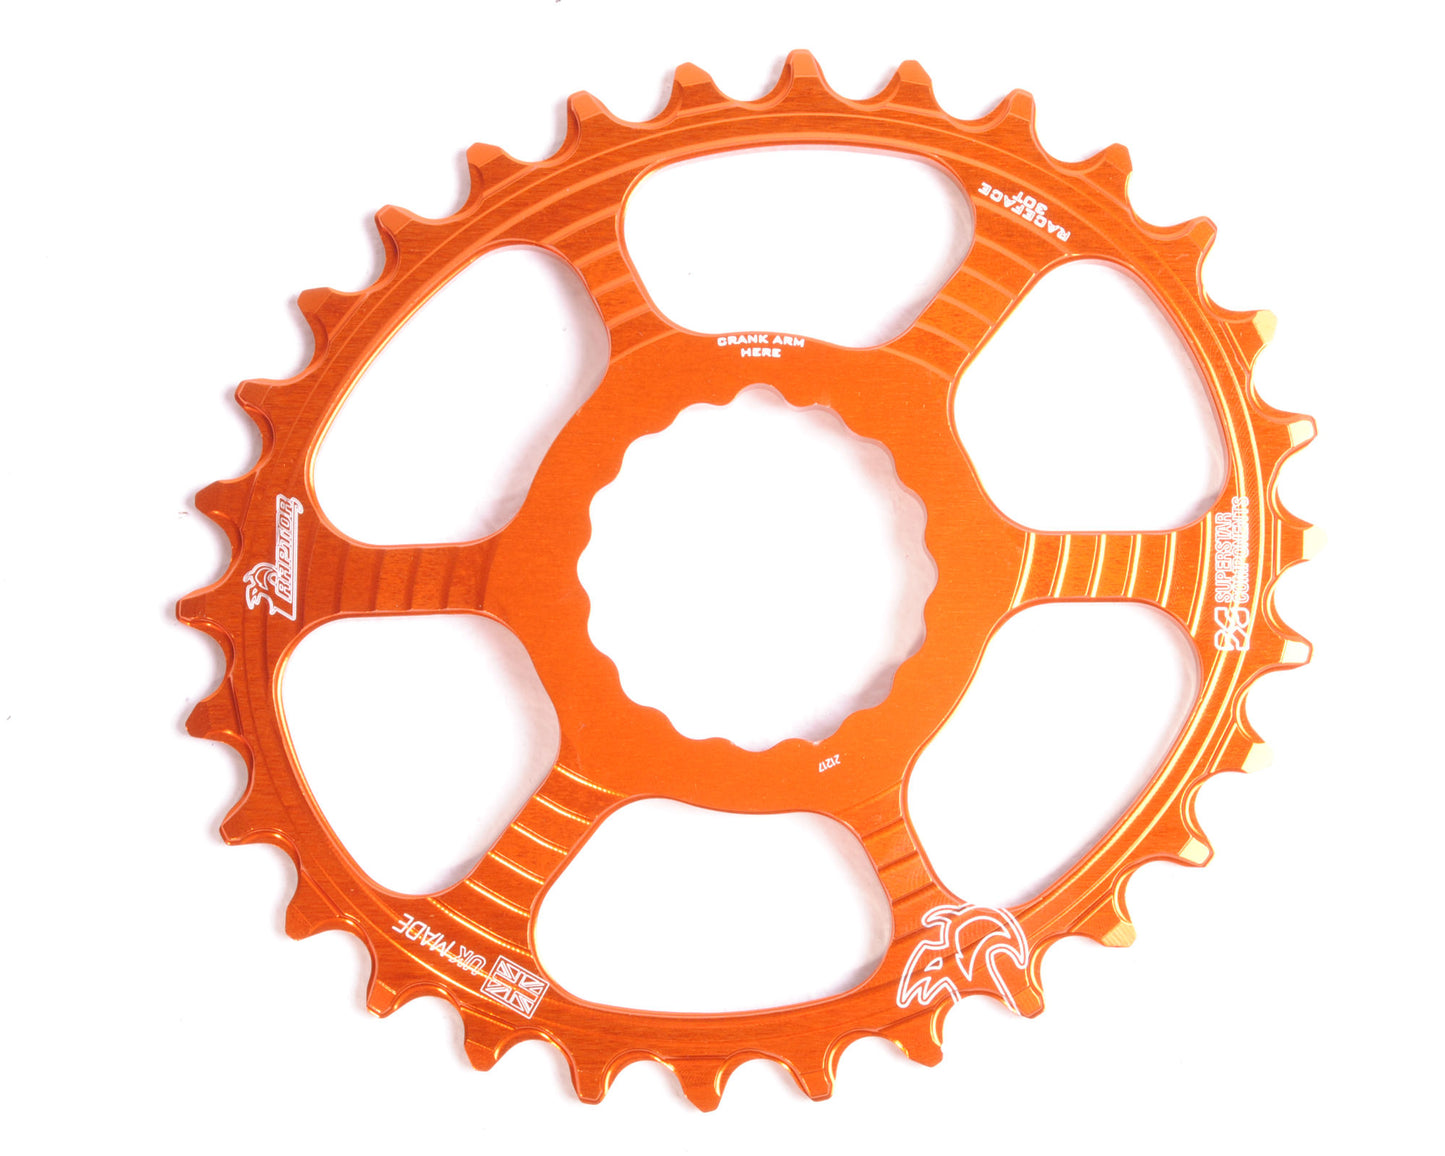 Raceface 0mm OFFSET Raptor Oval Chainring - UK MADE